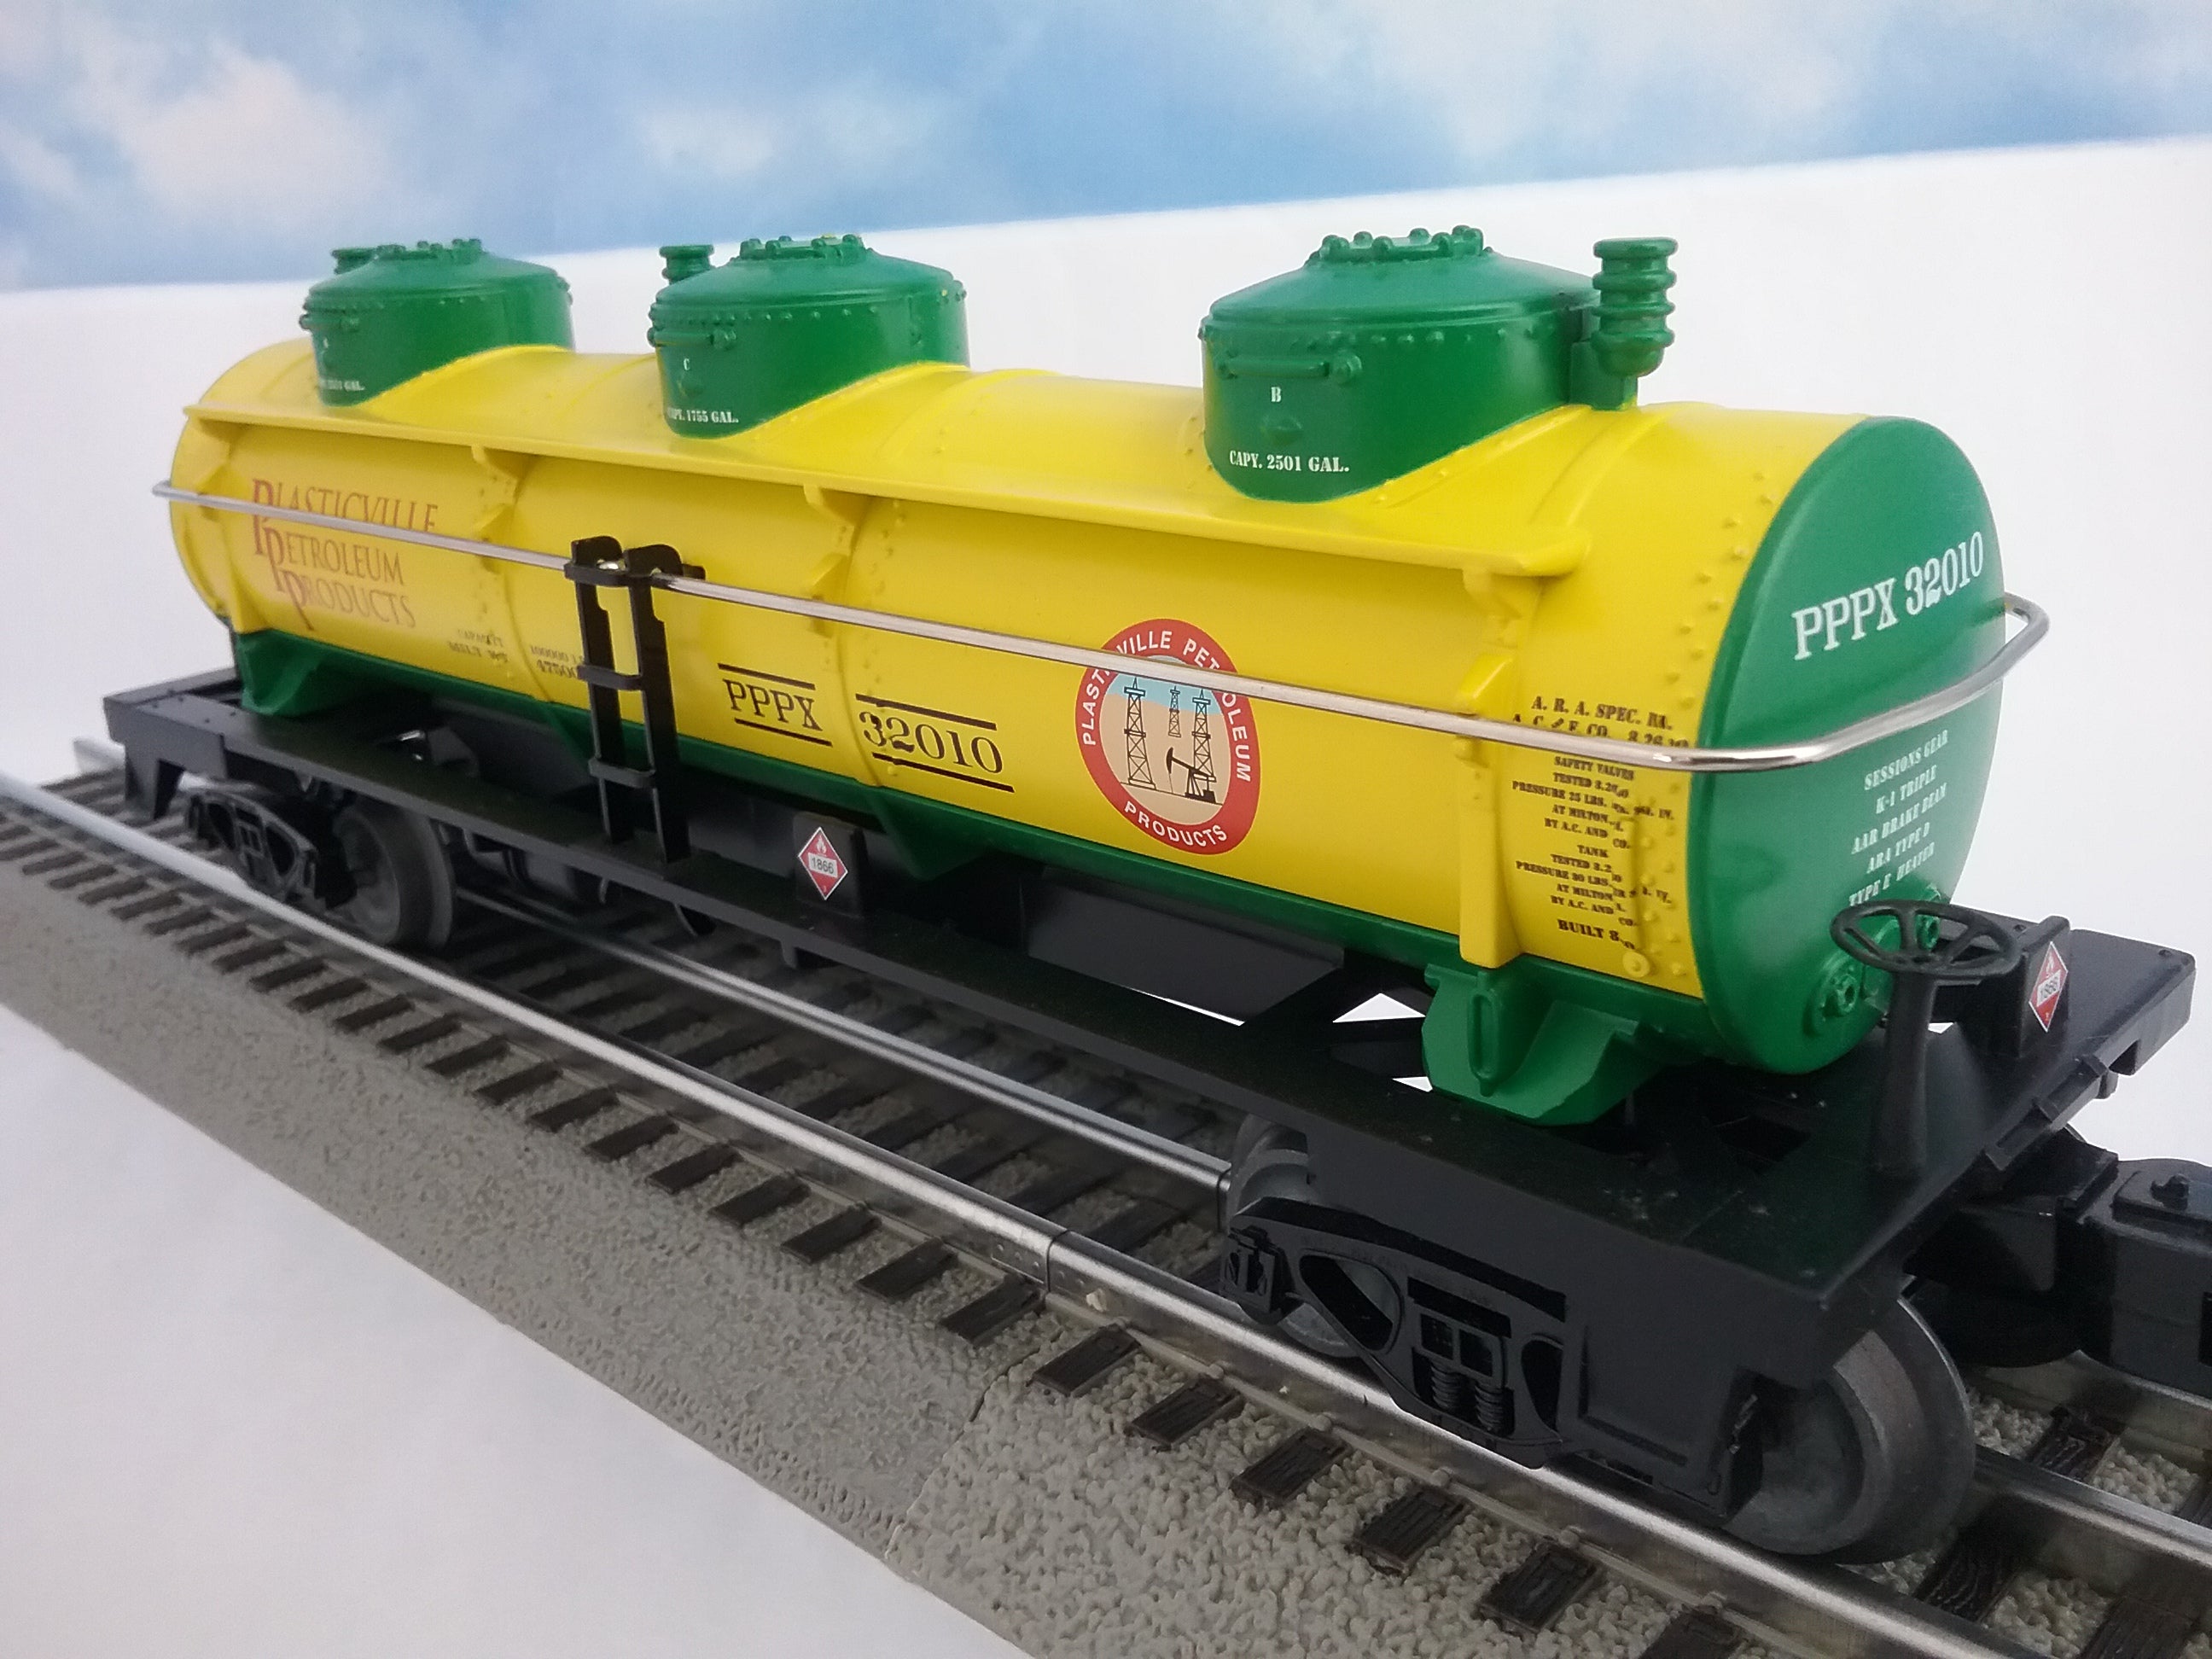 O Williams 3-DOME Tank Car - PPPX 32010